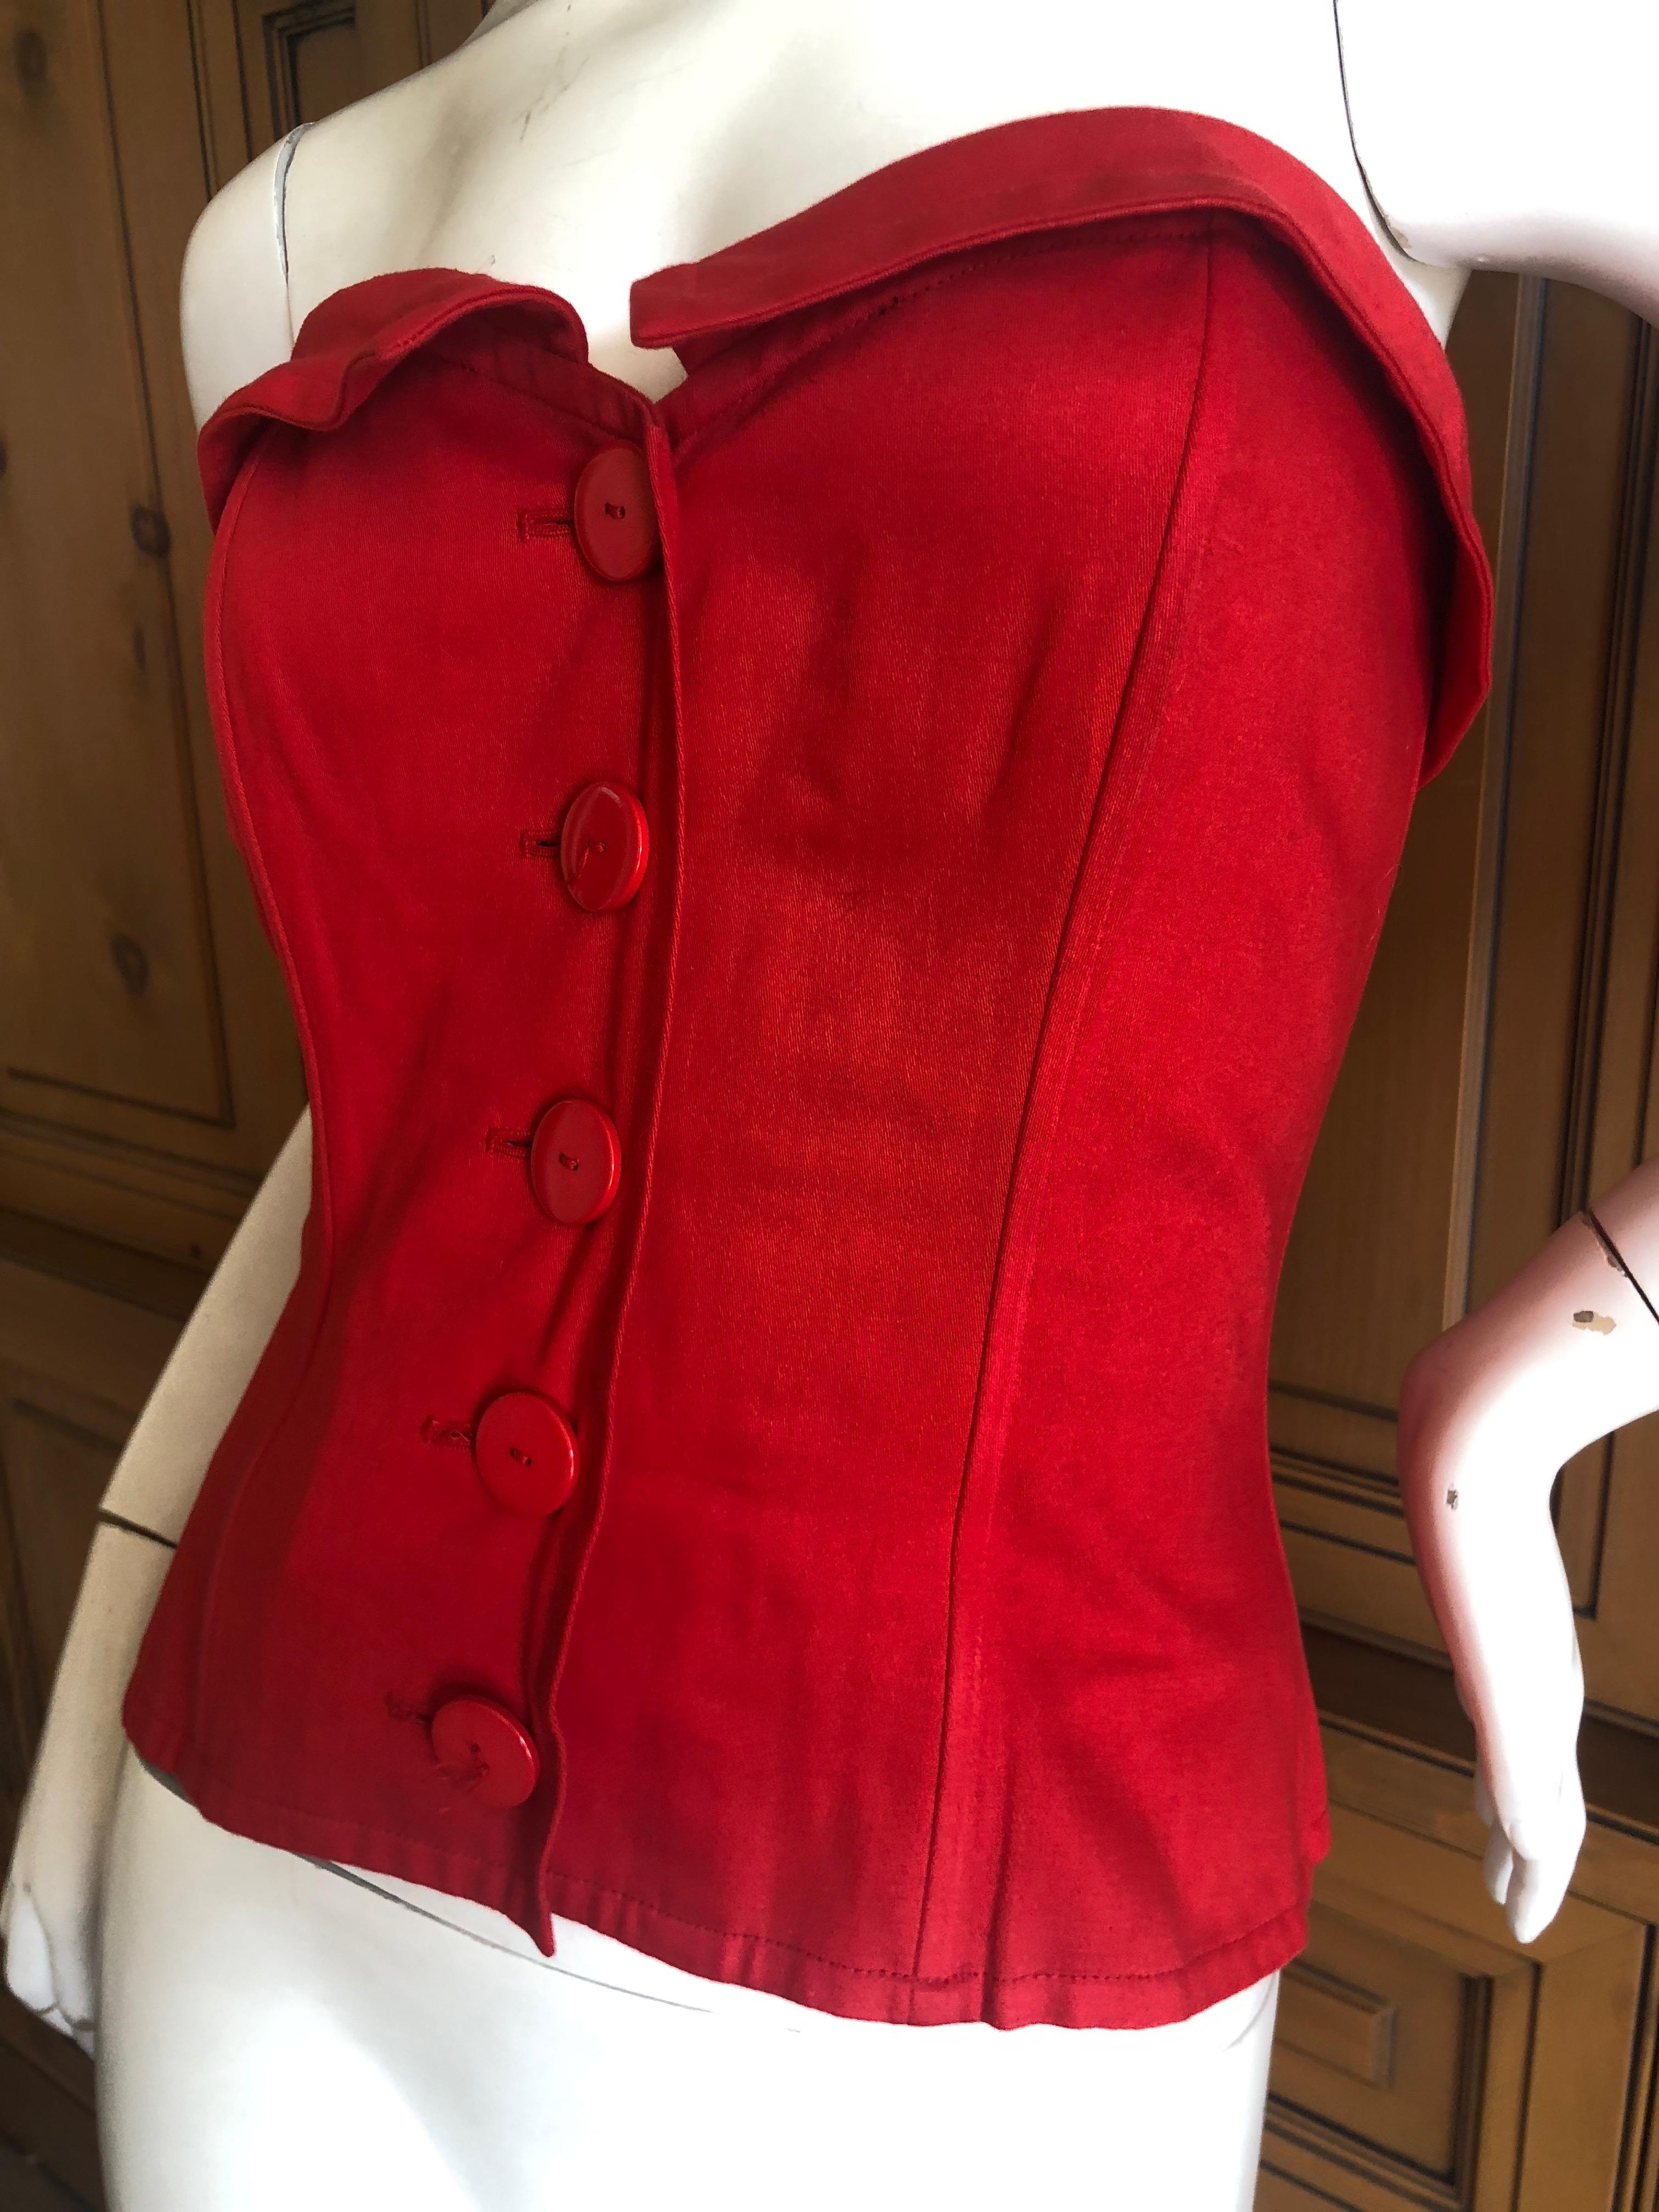 Yves Saint Laurent 1970's Variation Red Cotton Button Up Bustier

Size 40
Bust 34